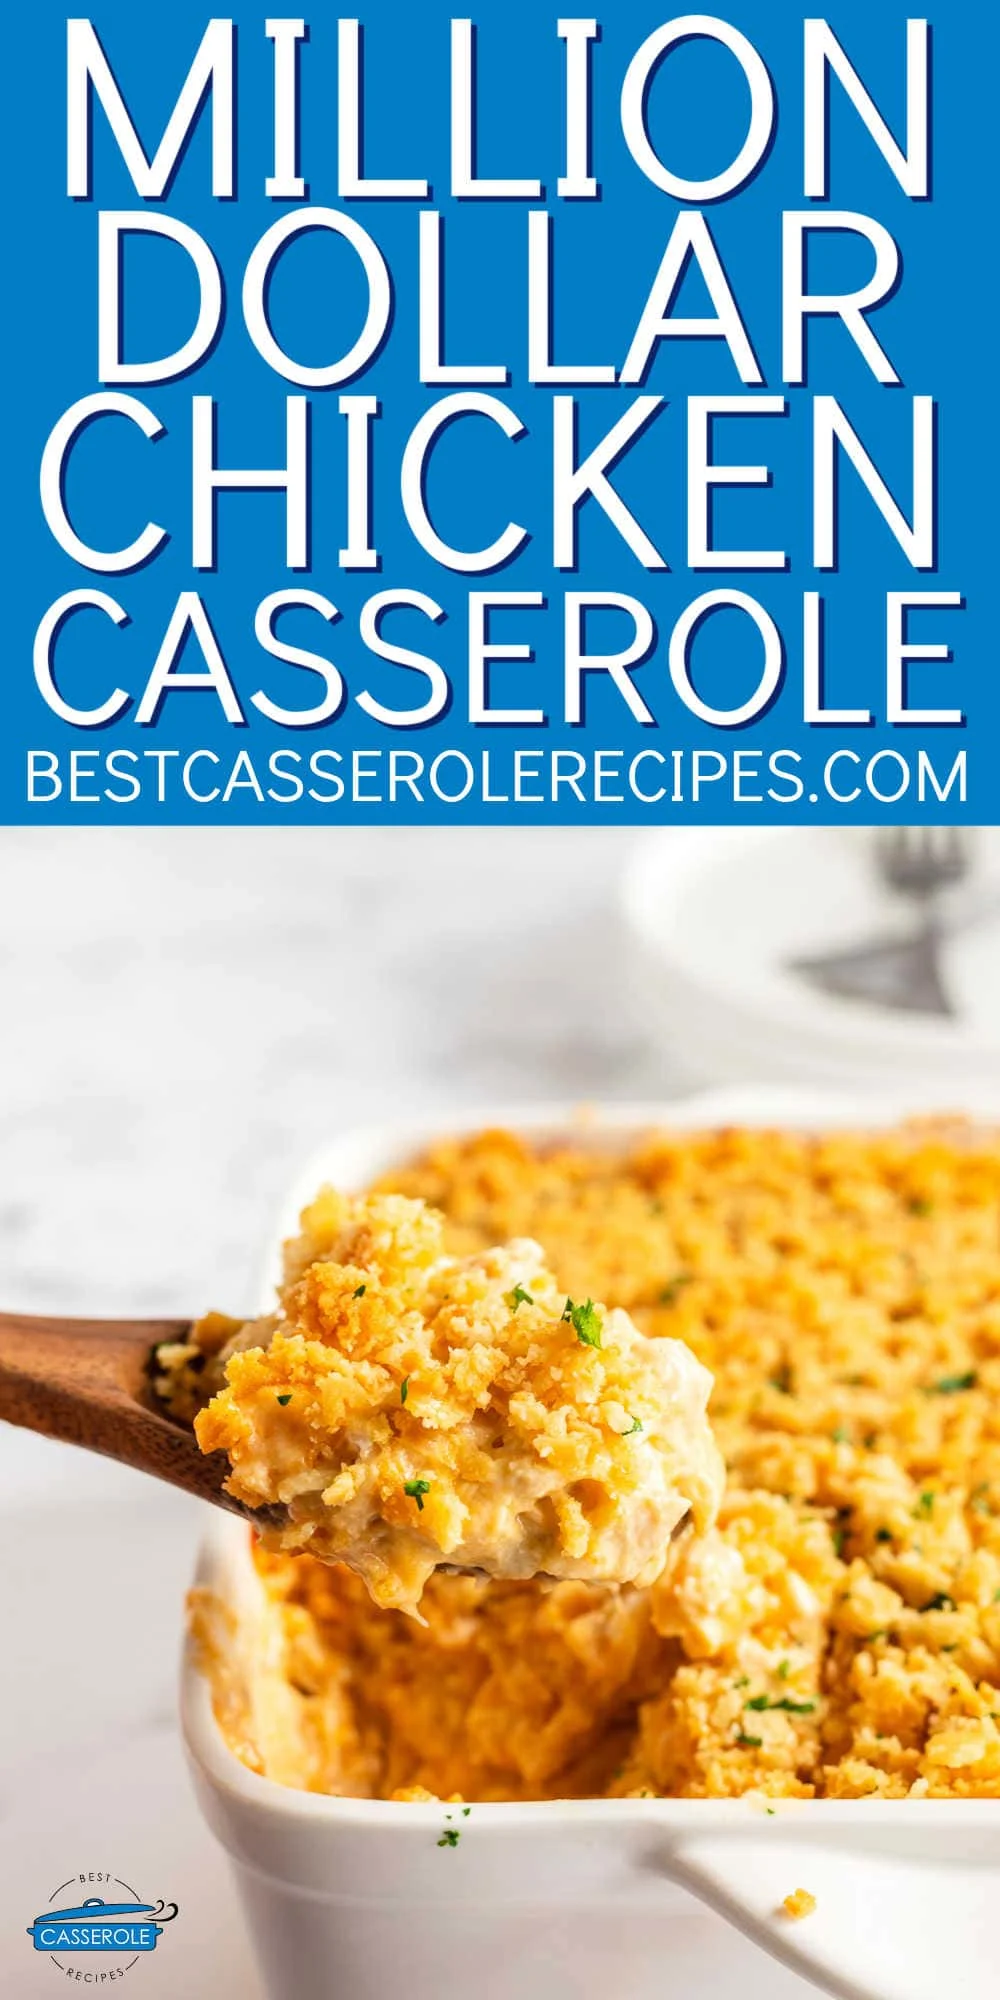 scoop of casserole with a blue banner and text "million dollar chicken casserole"